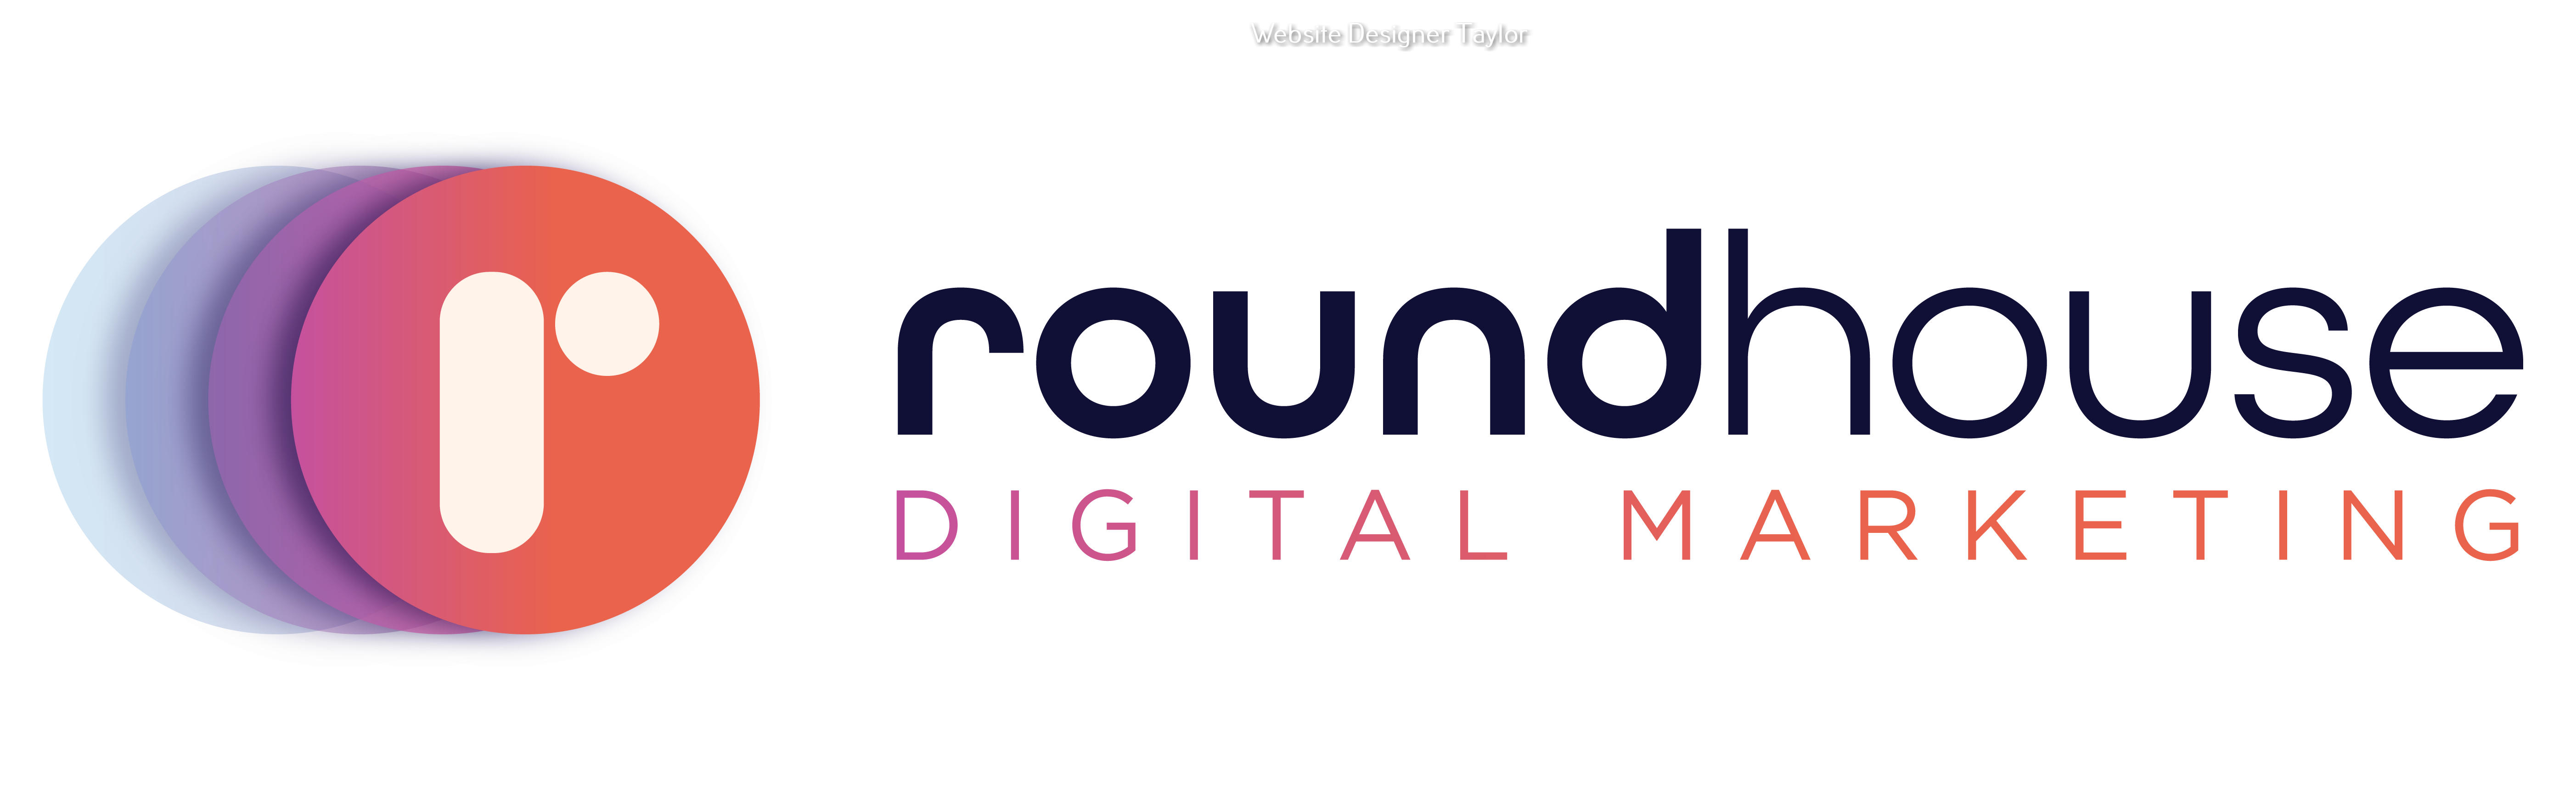 Roundhouse Digital Marketing Outlines Its Web Design and Marketing Services